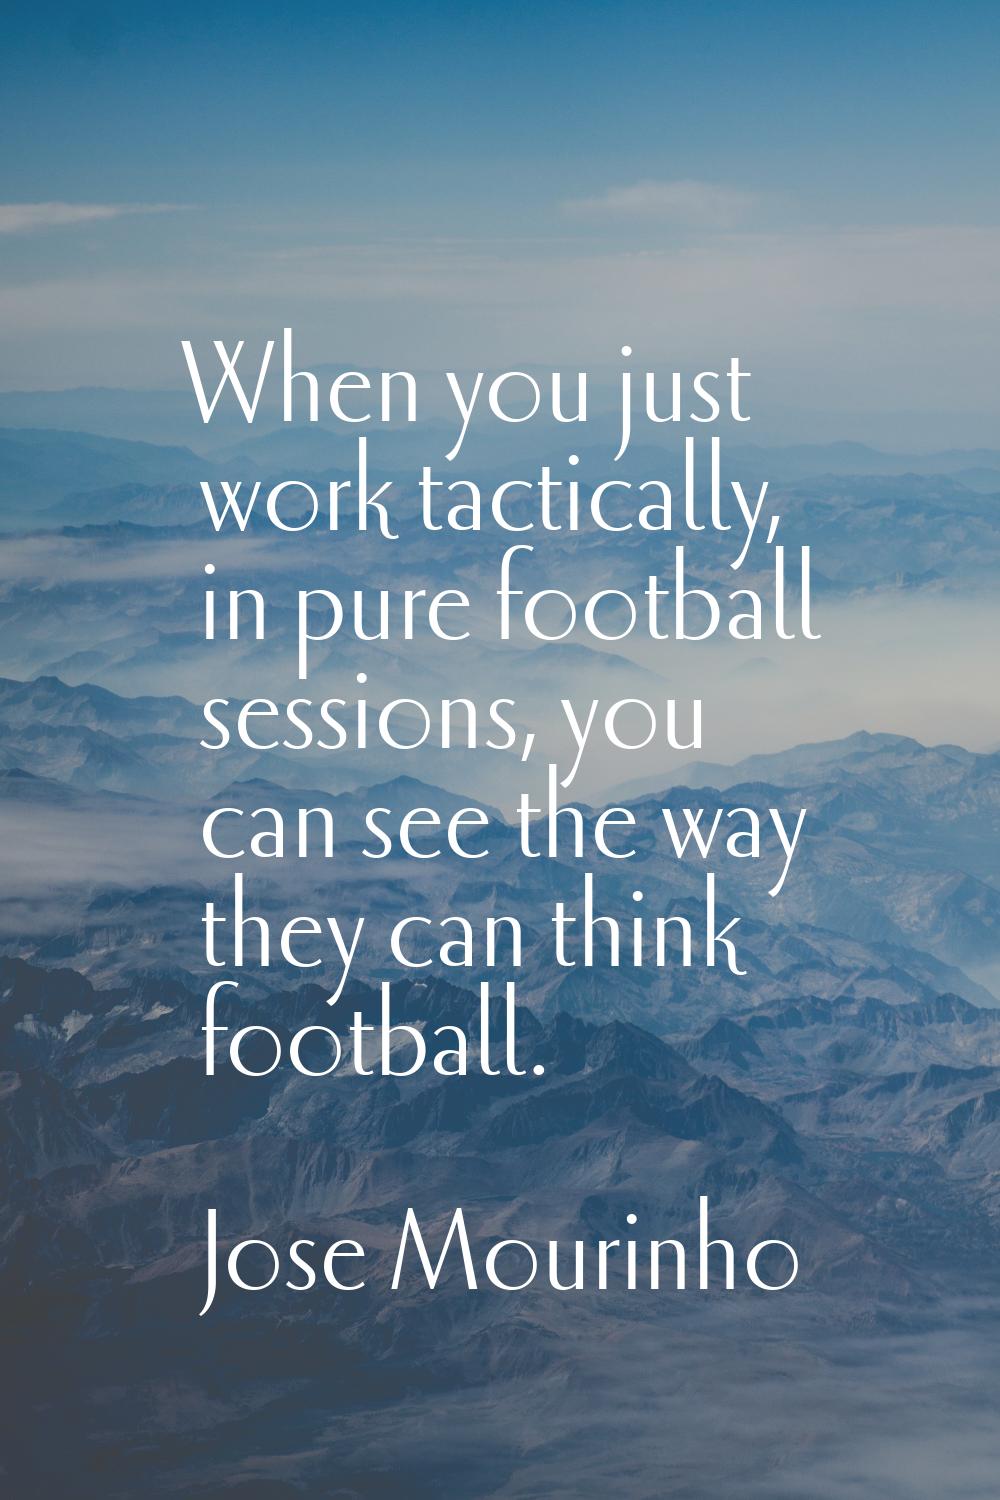 When you just work tactically, in pure football sessions, you can see the way they can think footba